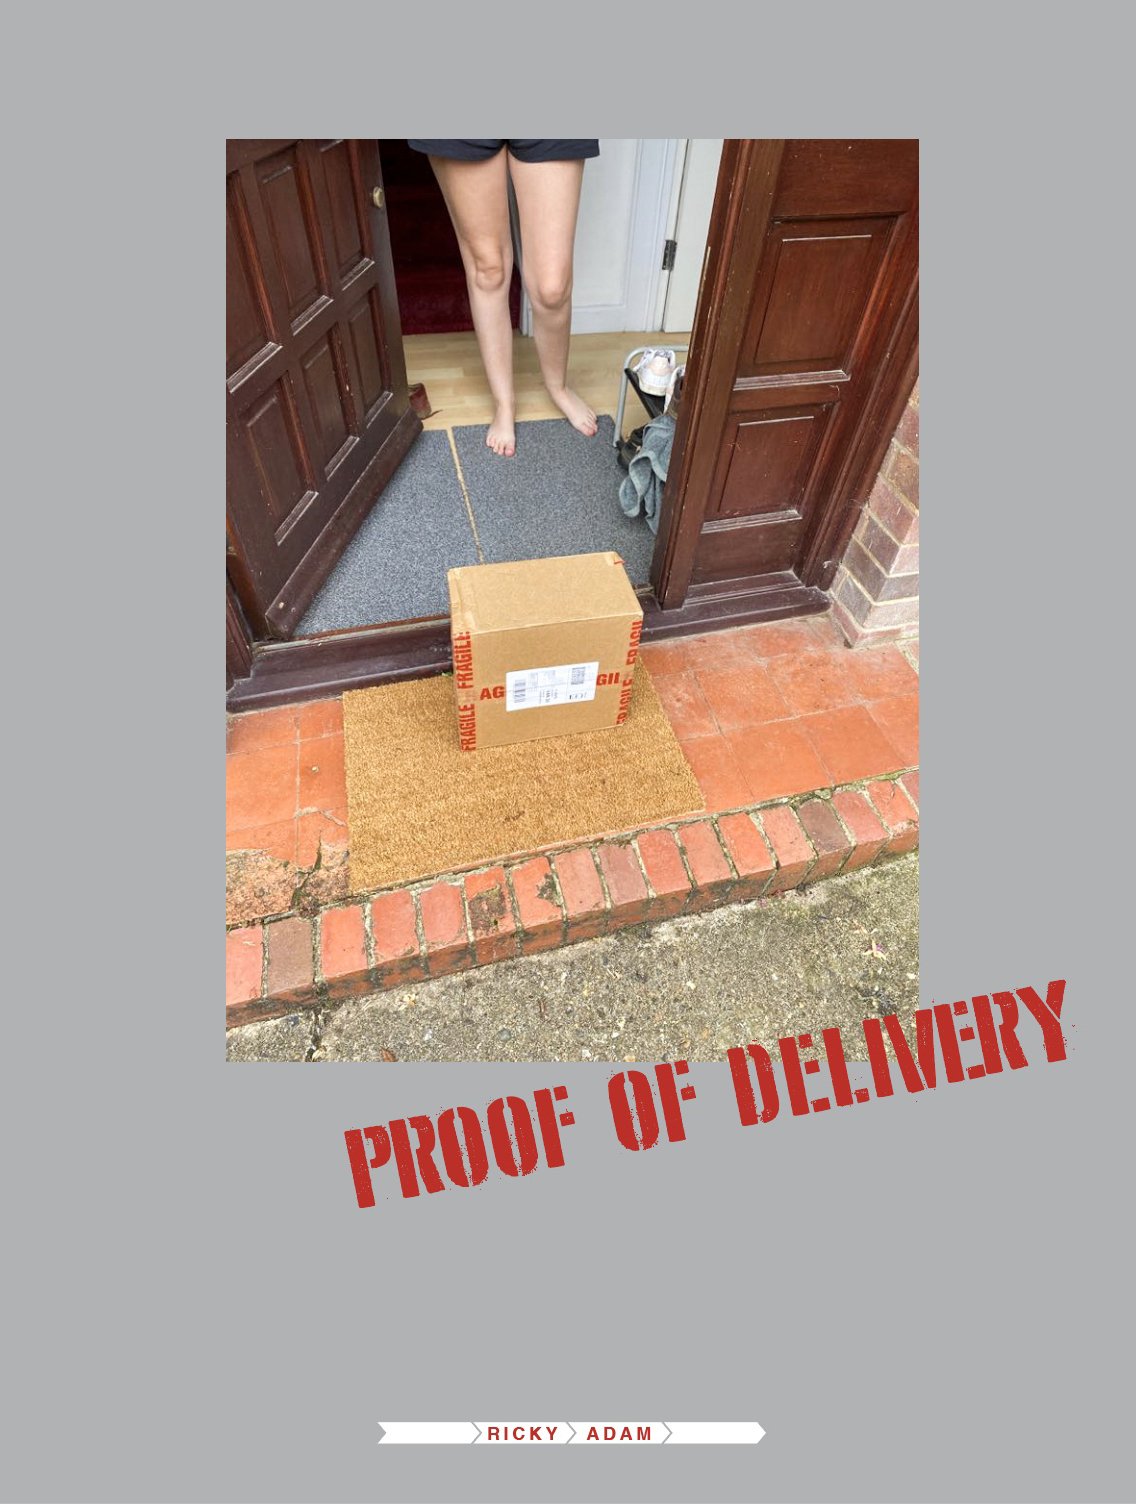 Proof-of-Delivery-Ricky-Adam